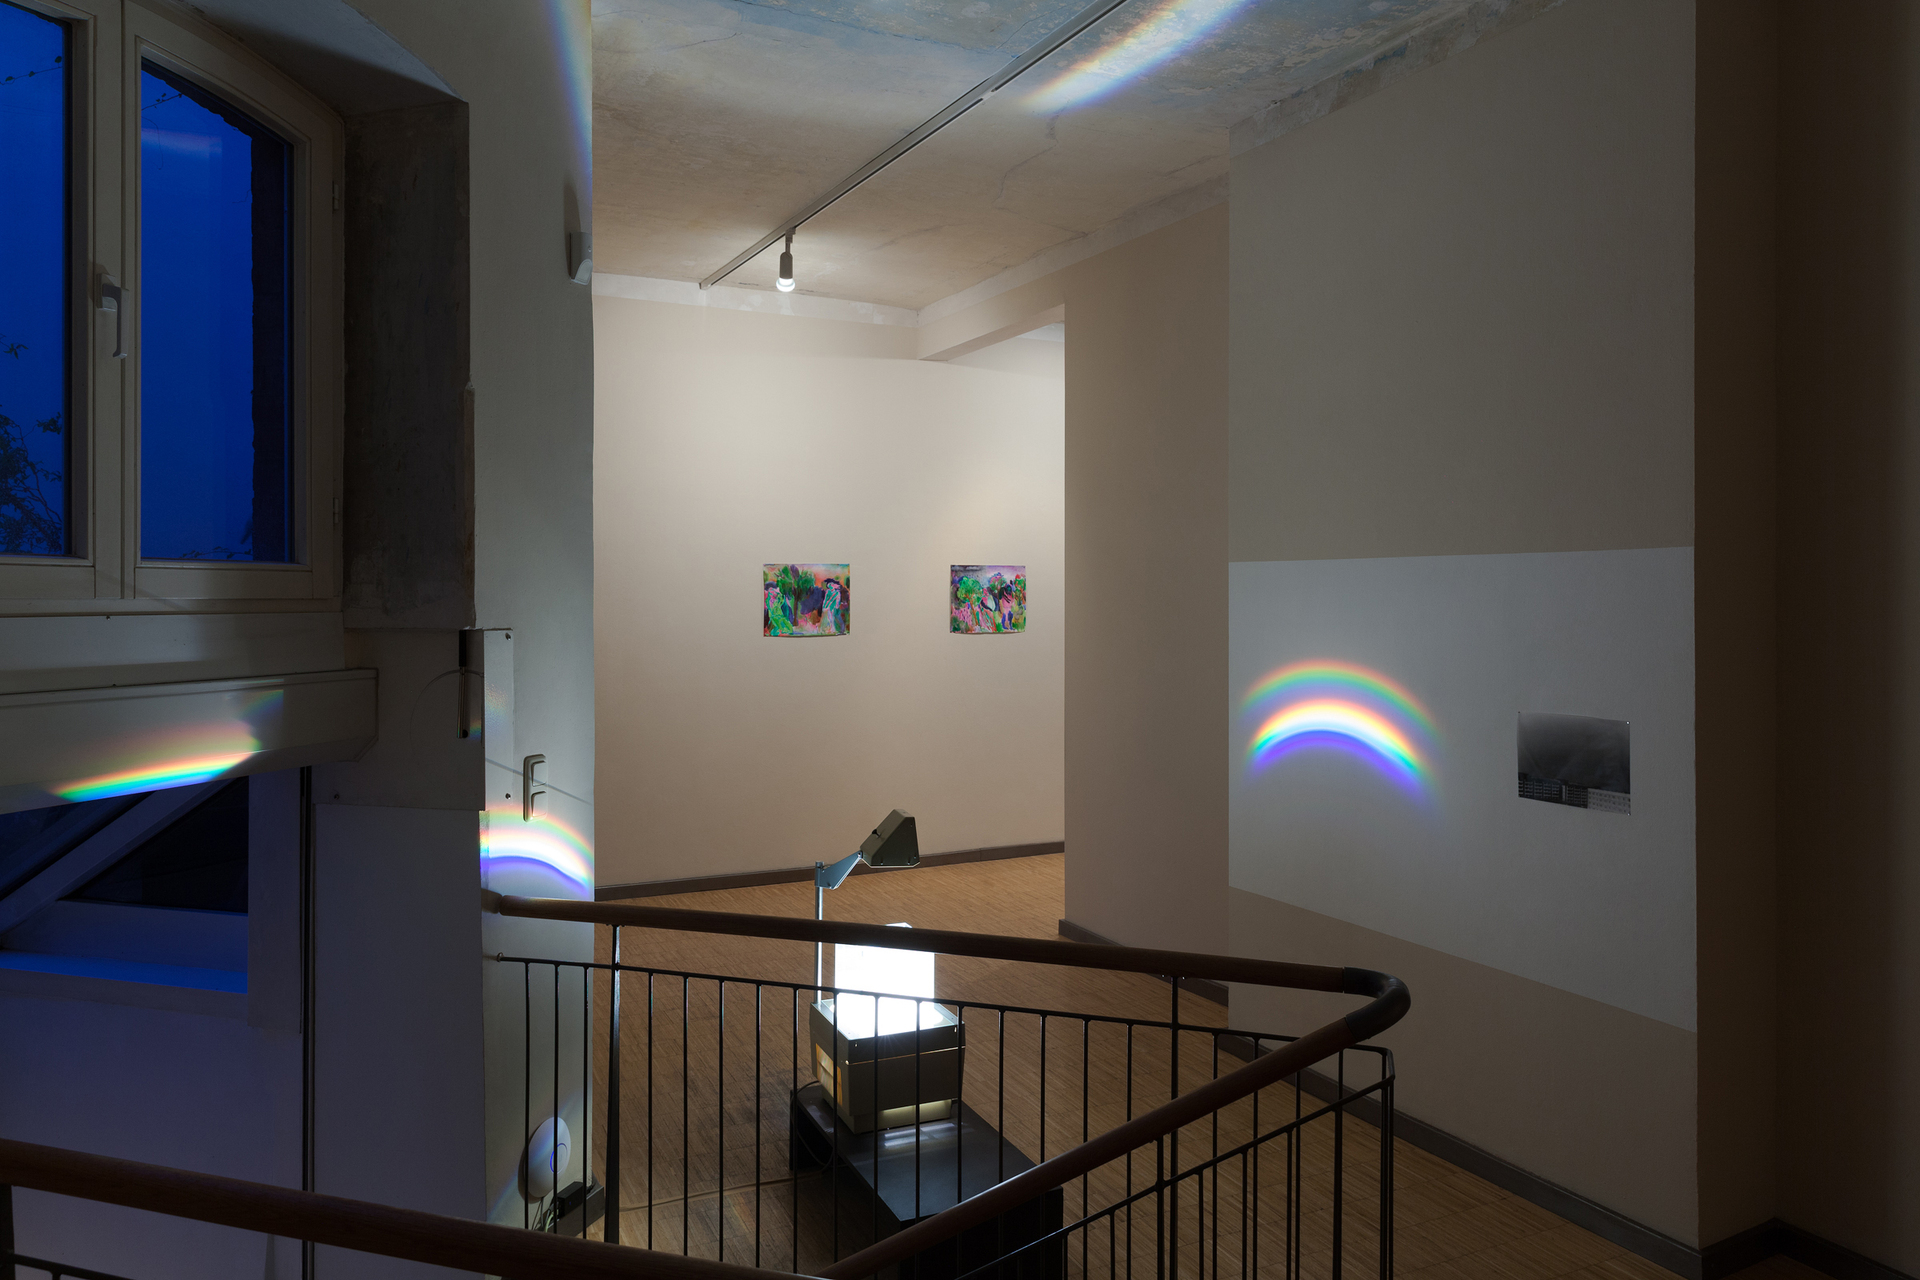 Exhibition view, Kristin Wenzel (in the front), 'How to make a rainbow`, 2018, mixed media installation, Courtesy Kristin Wenzel &amp; VG Bild-Kunst, René Spitzer
, 'De-extinction DKPL2', 
2021
 and 'Sunset Ah Ah', 2021, both watercolour on paper